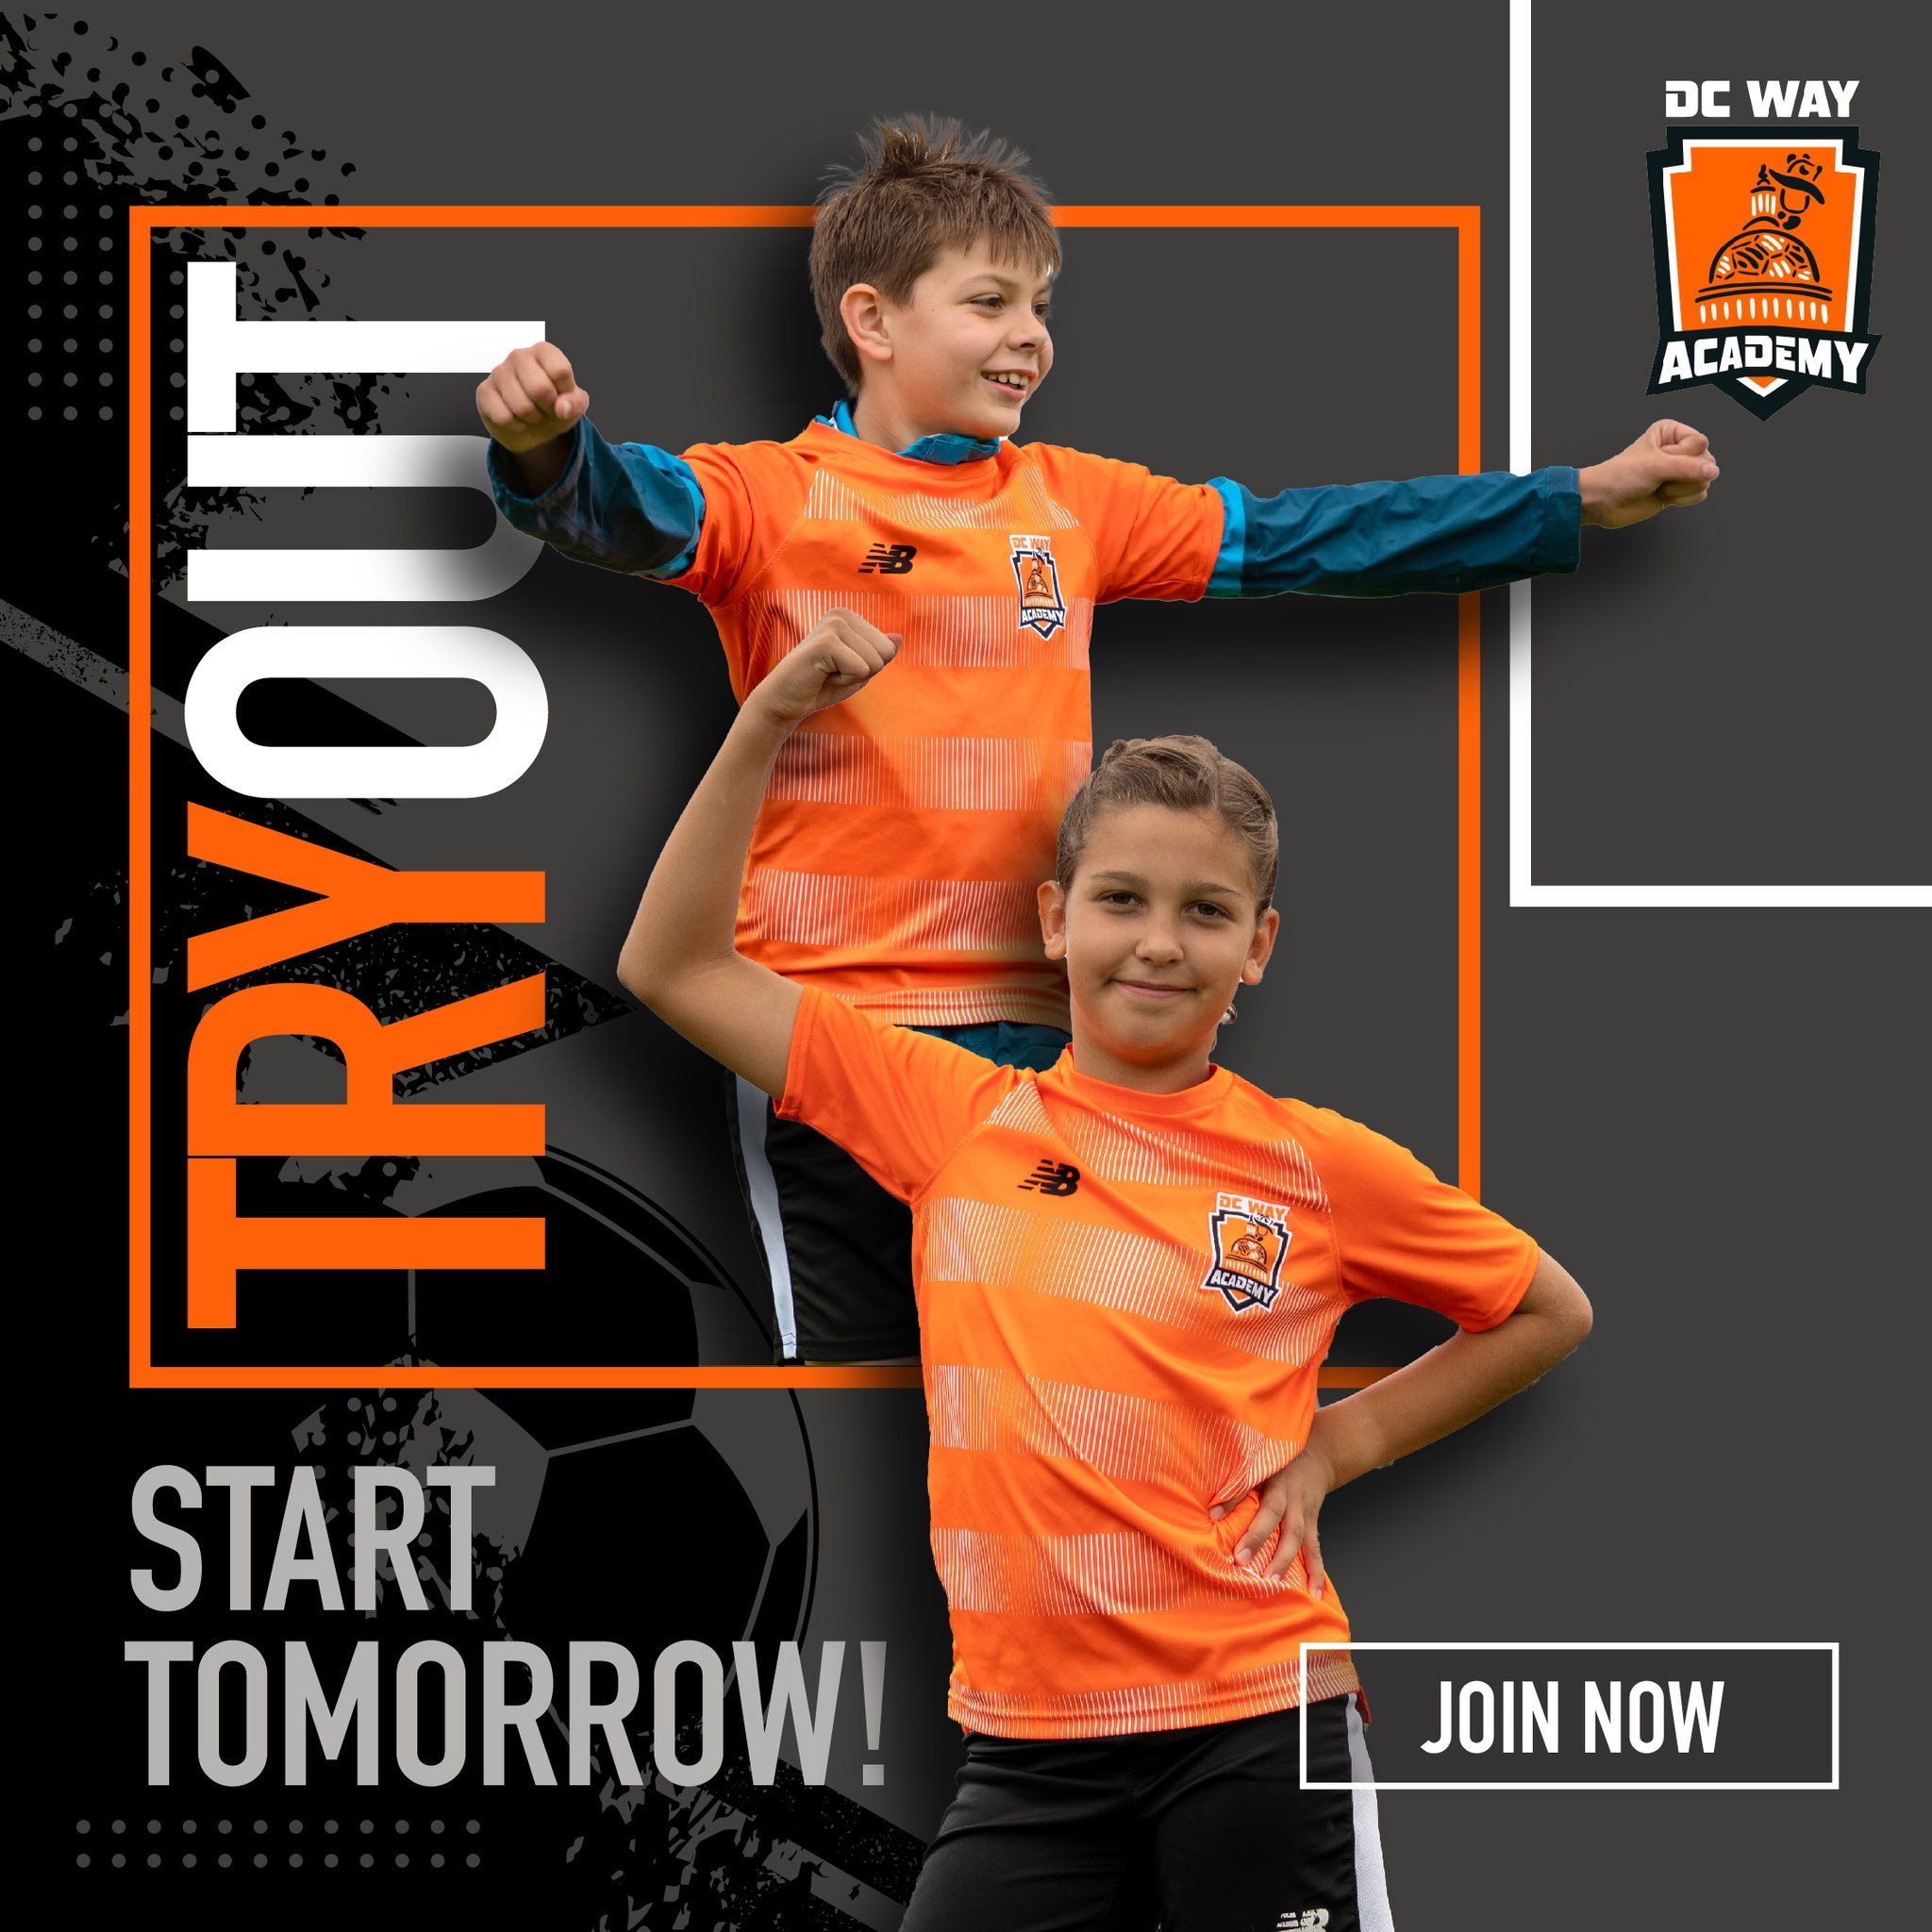 🚨 Just 1 day left until the kickoff of DCWA Tryouts! ⚽️ Ready to showcase your soccer prowess and become part of our winning team? 🌟 Don't miss out on this opportunity to embark on an exhilarating journey toward success. 🏆

Secure your spot now by